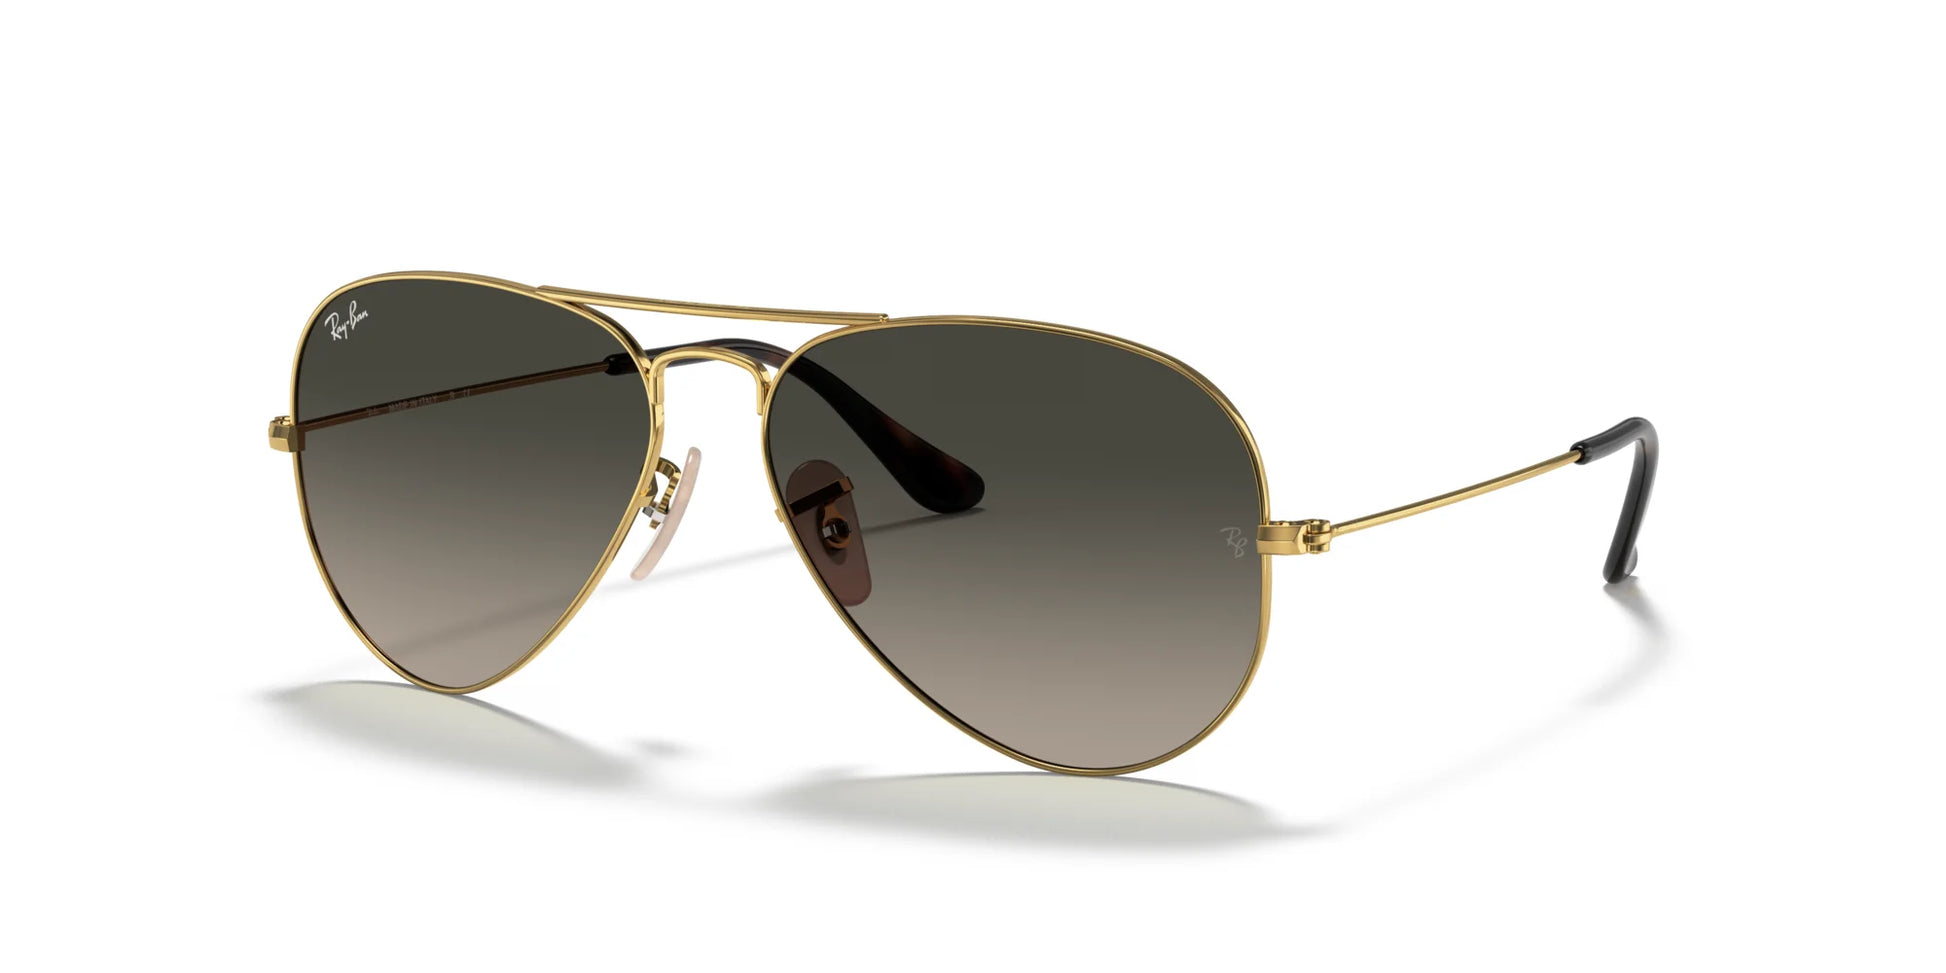 Ray-Ban AVIATOR LARGE METAL RB3025 Sunglasses | Size 58 Gold / Grey Gradient